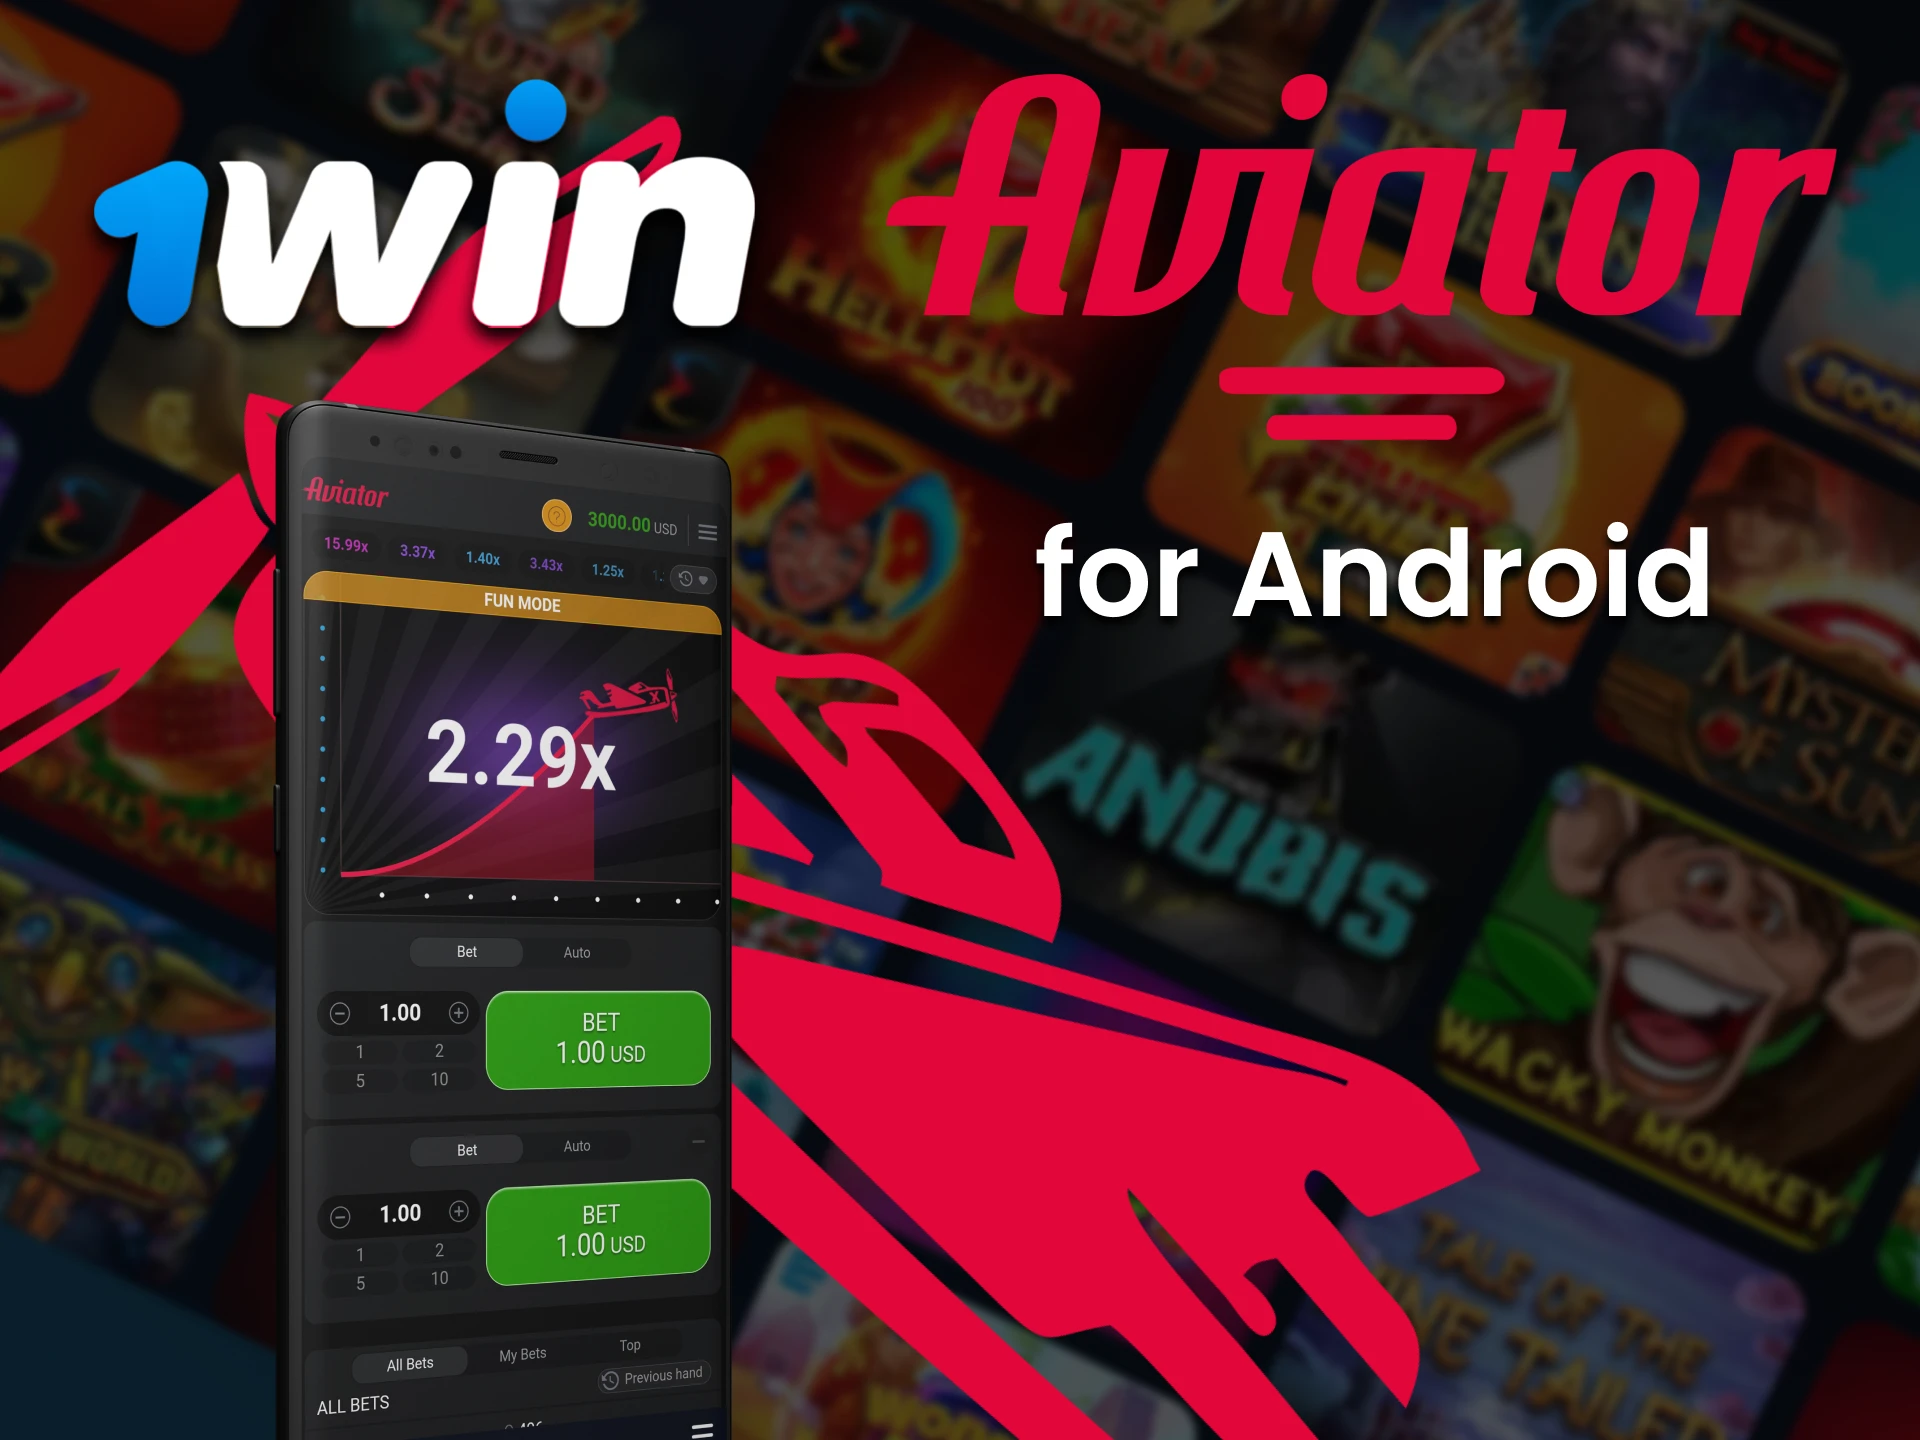 Play Aviator through the 1win app on Android devices.